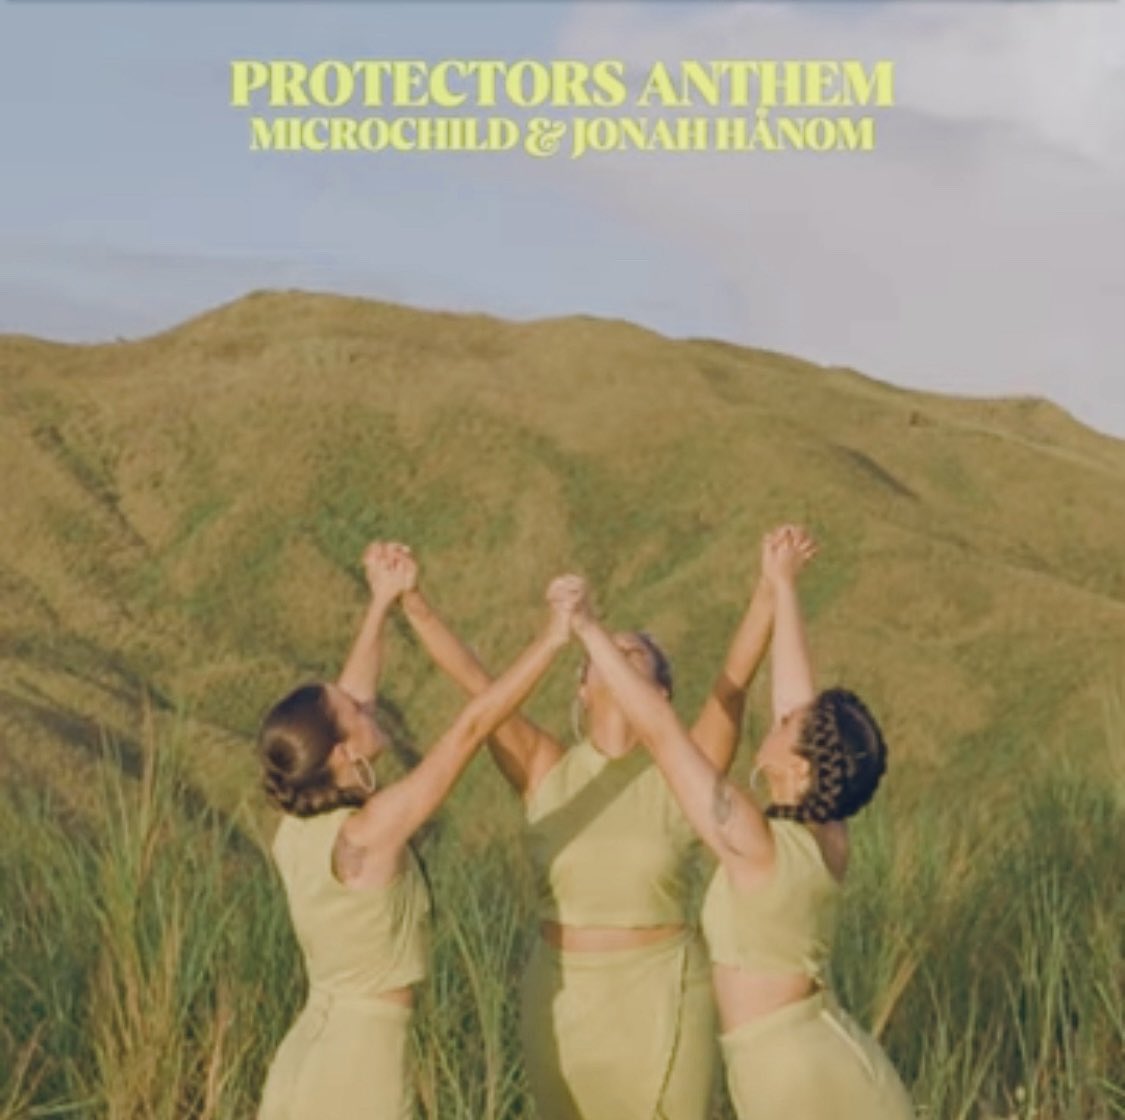 “Protectors Anthem” to those fighting for their land and water. @nihikids #Indigenous Media and Protect #Guam Water with Chamoran artists @microchild and @jonahanom. #Marianas #Micronesia #Pacific SONG: youtu.be/TbsDWS94zuY STORY: guampdn.com/news/nihi-indi… via @GuamPDN